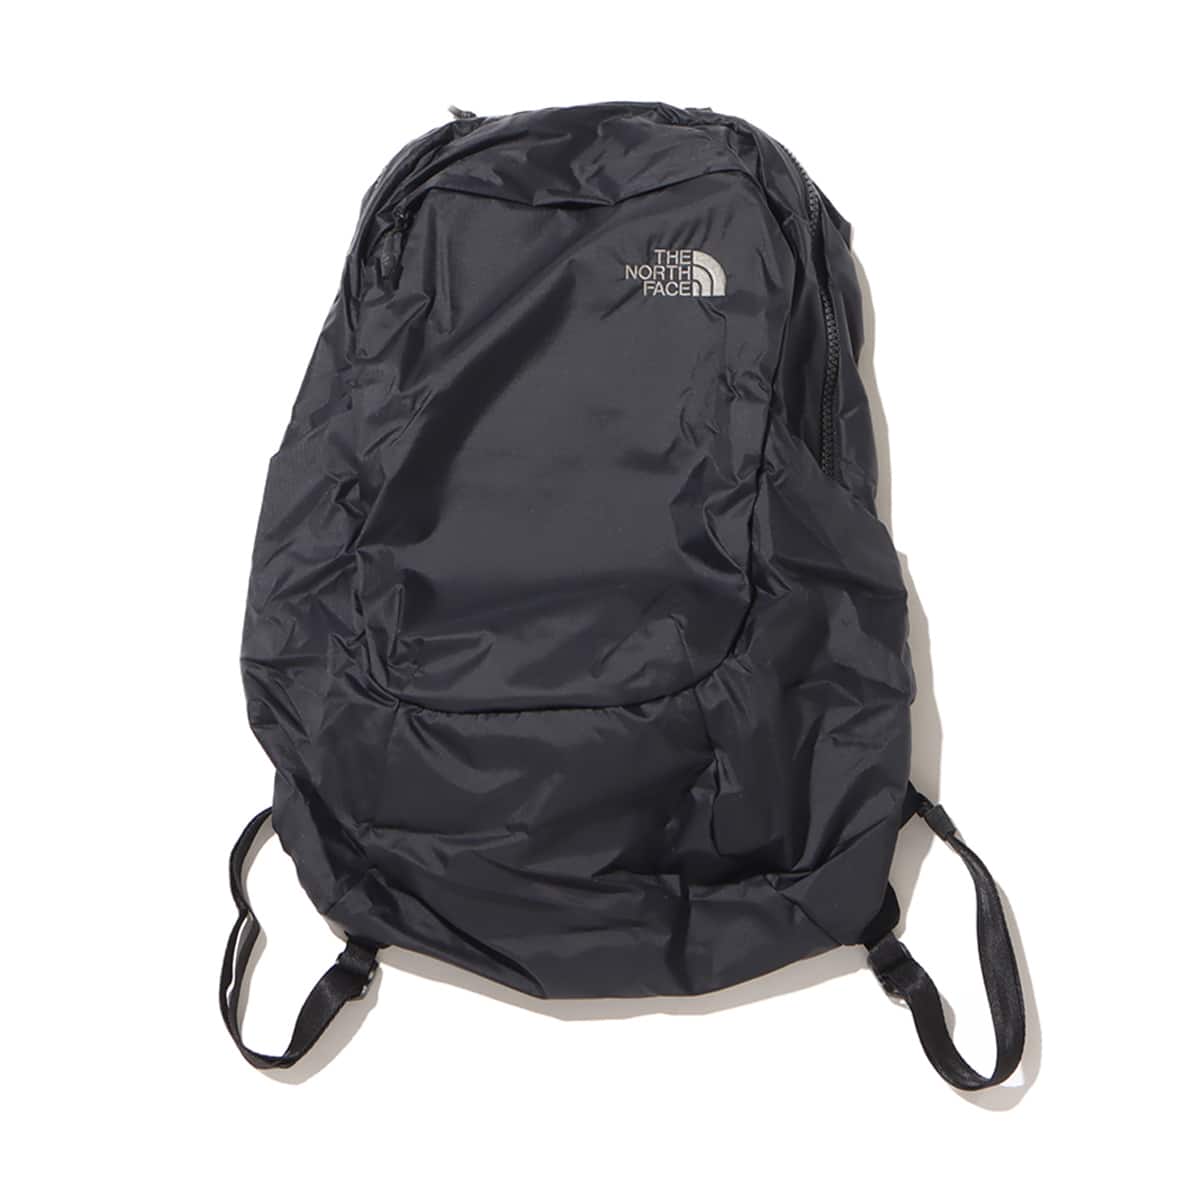 THE NORTH FACE GLAM DAYPACK BLACK 23FW-I